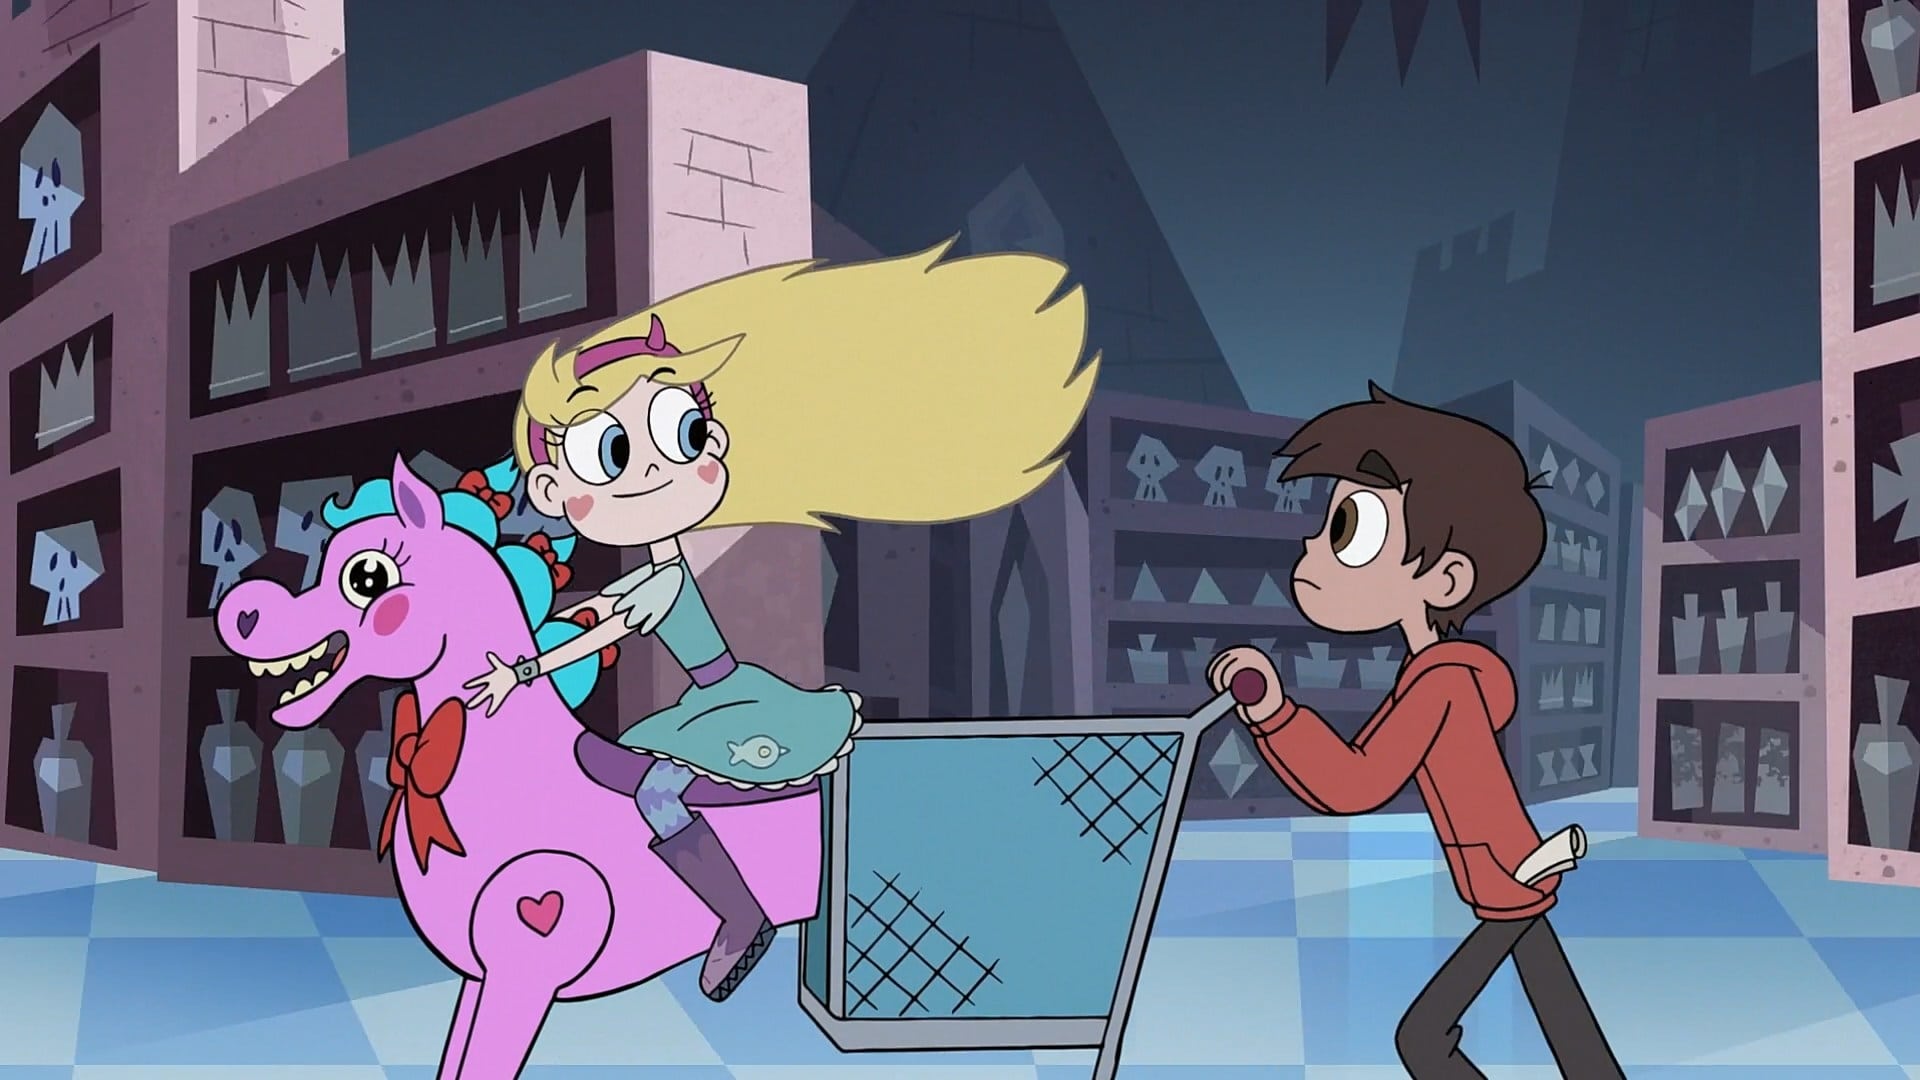 Star vs. the Forces of Evil Season 3 Episode 16. 